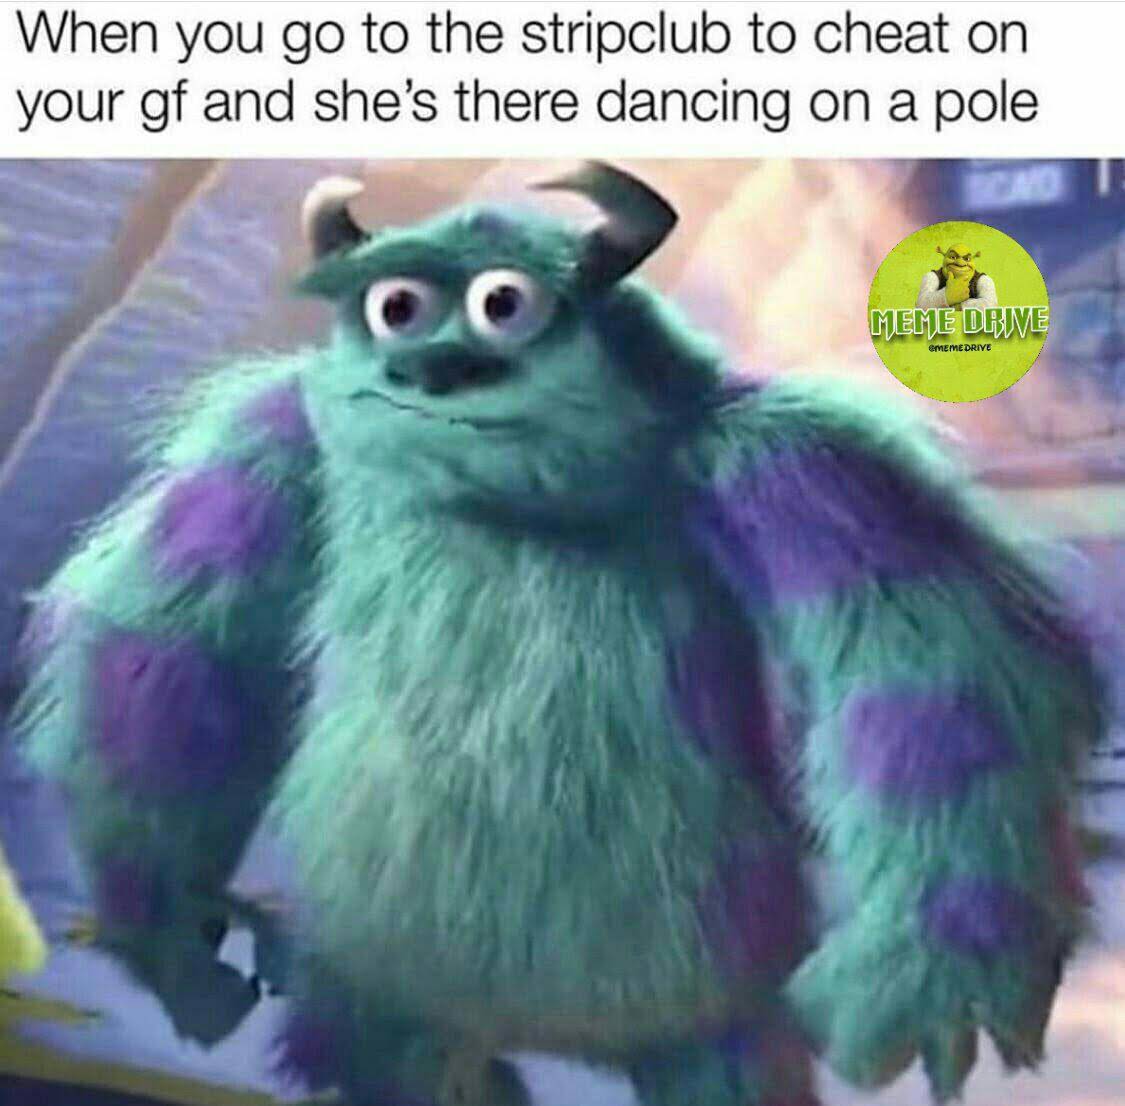 sex-memes - template meme cheat - When you go to the stripclub to cheat on your gf and she's there dancing on a pole Meme Drive Meme Drive